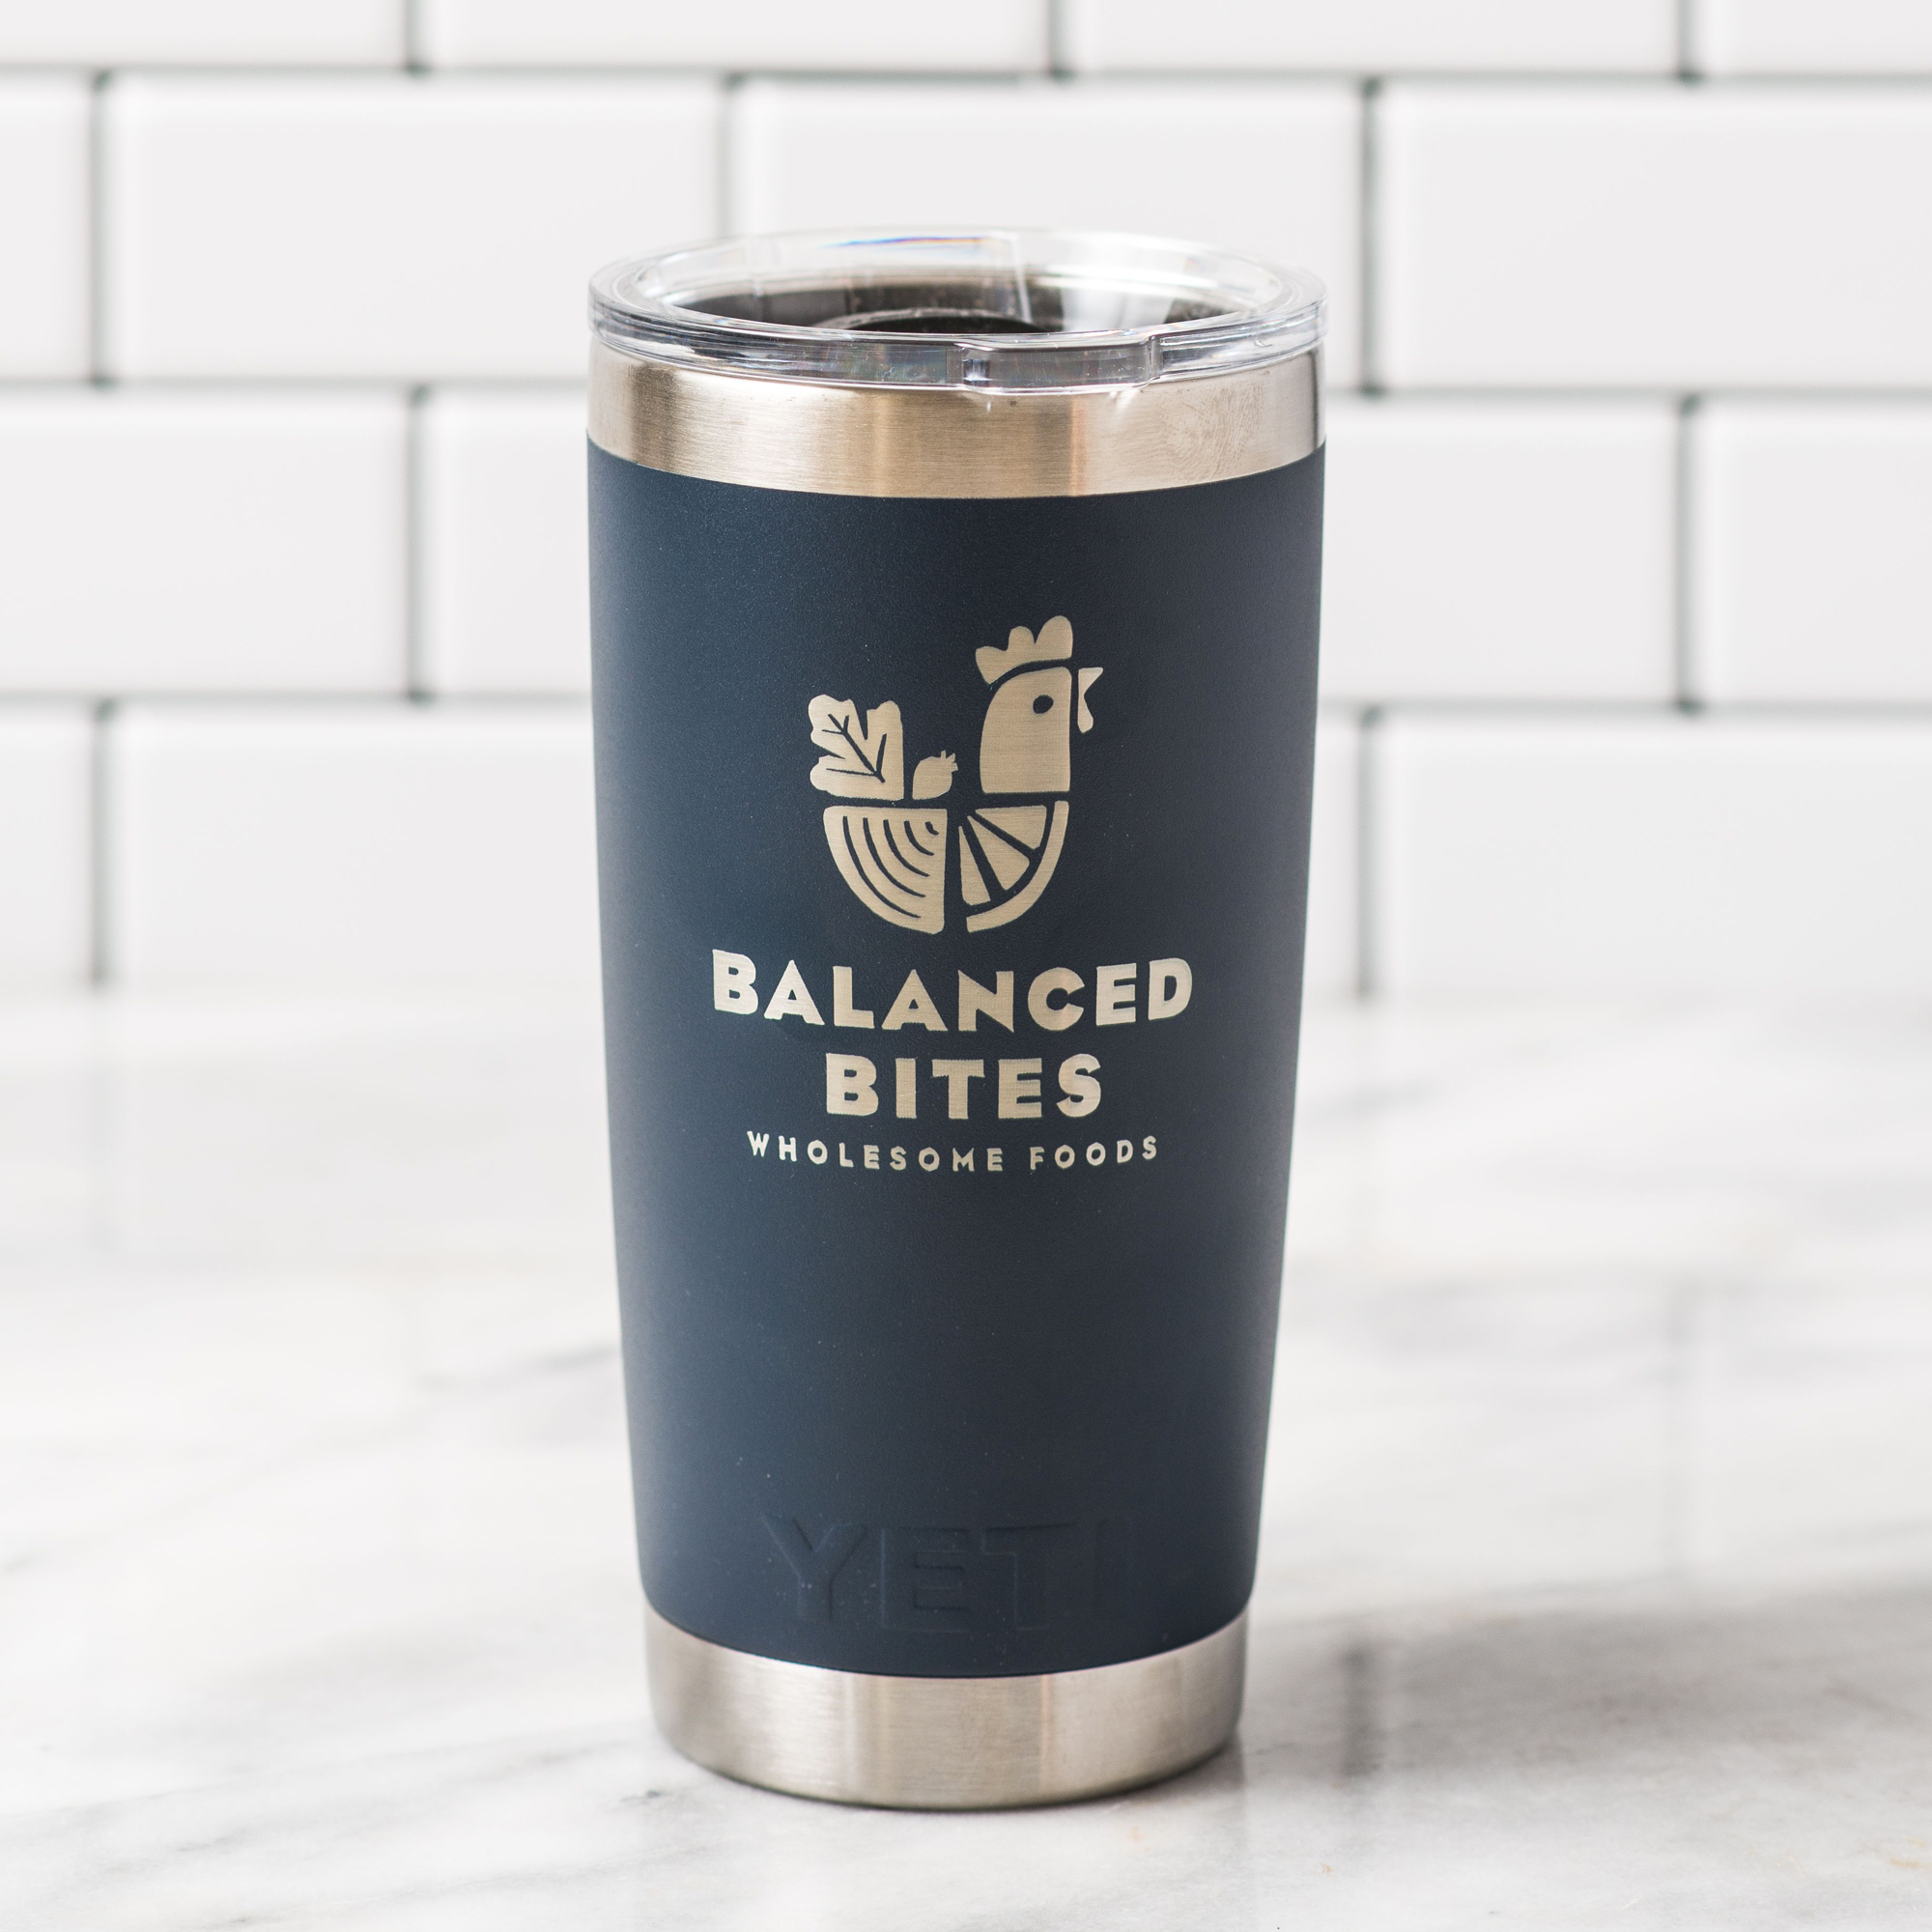 2-Pack Limited Edition Infused Sugars & Navy YETI Tumbler